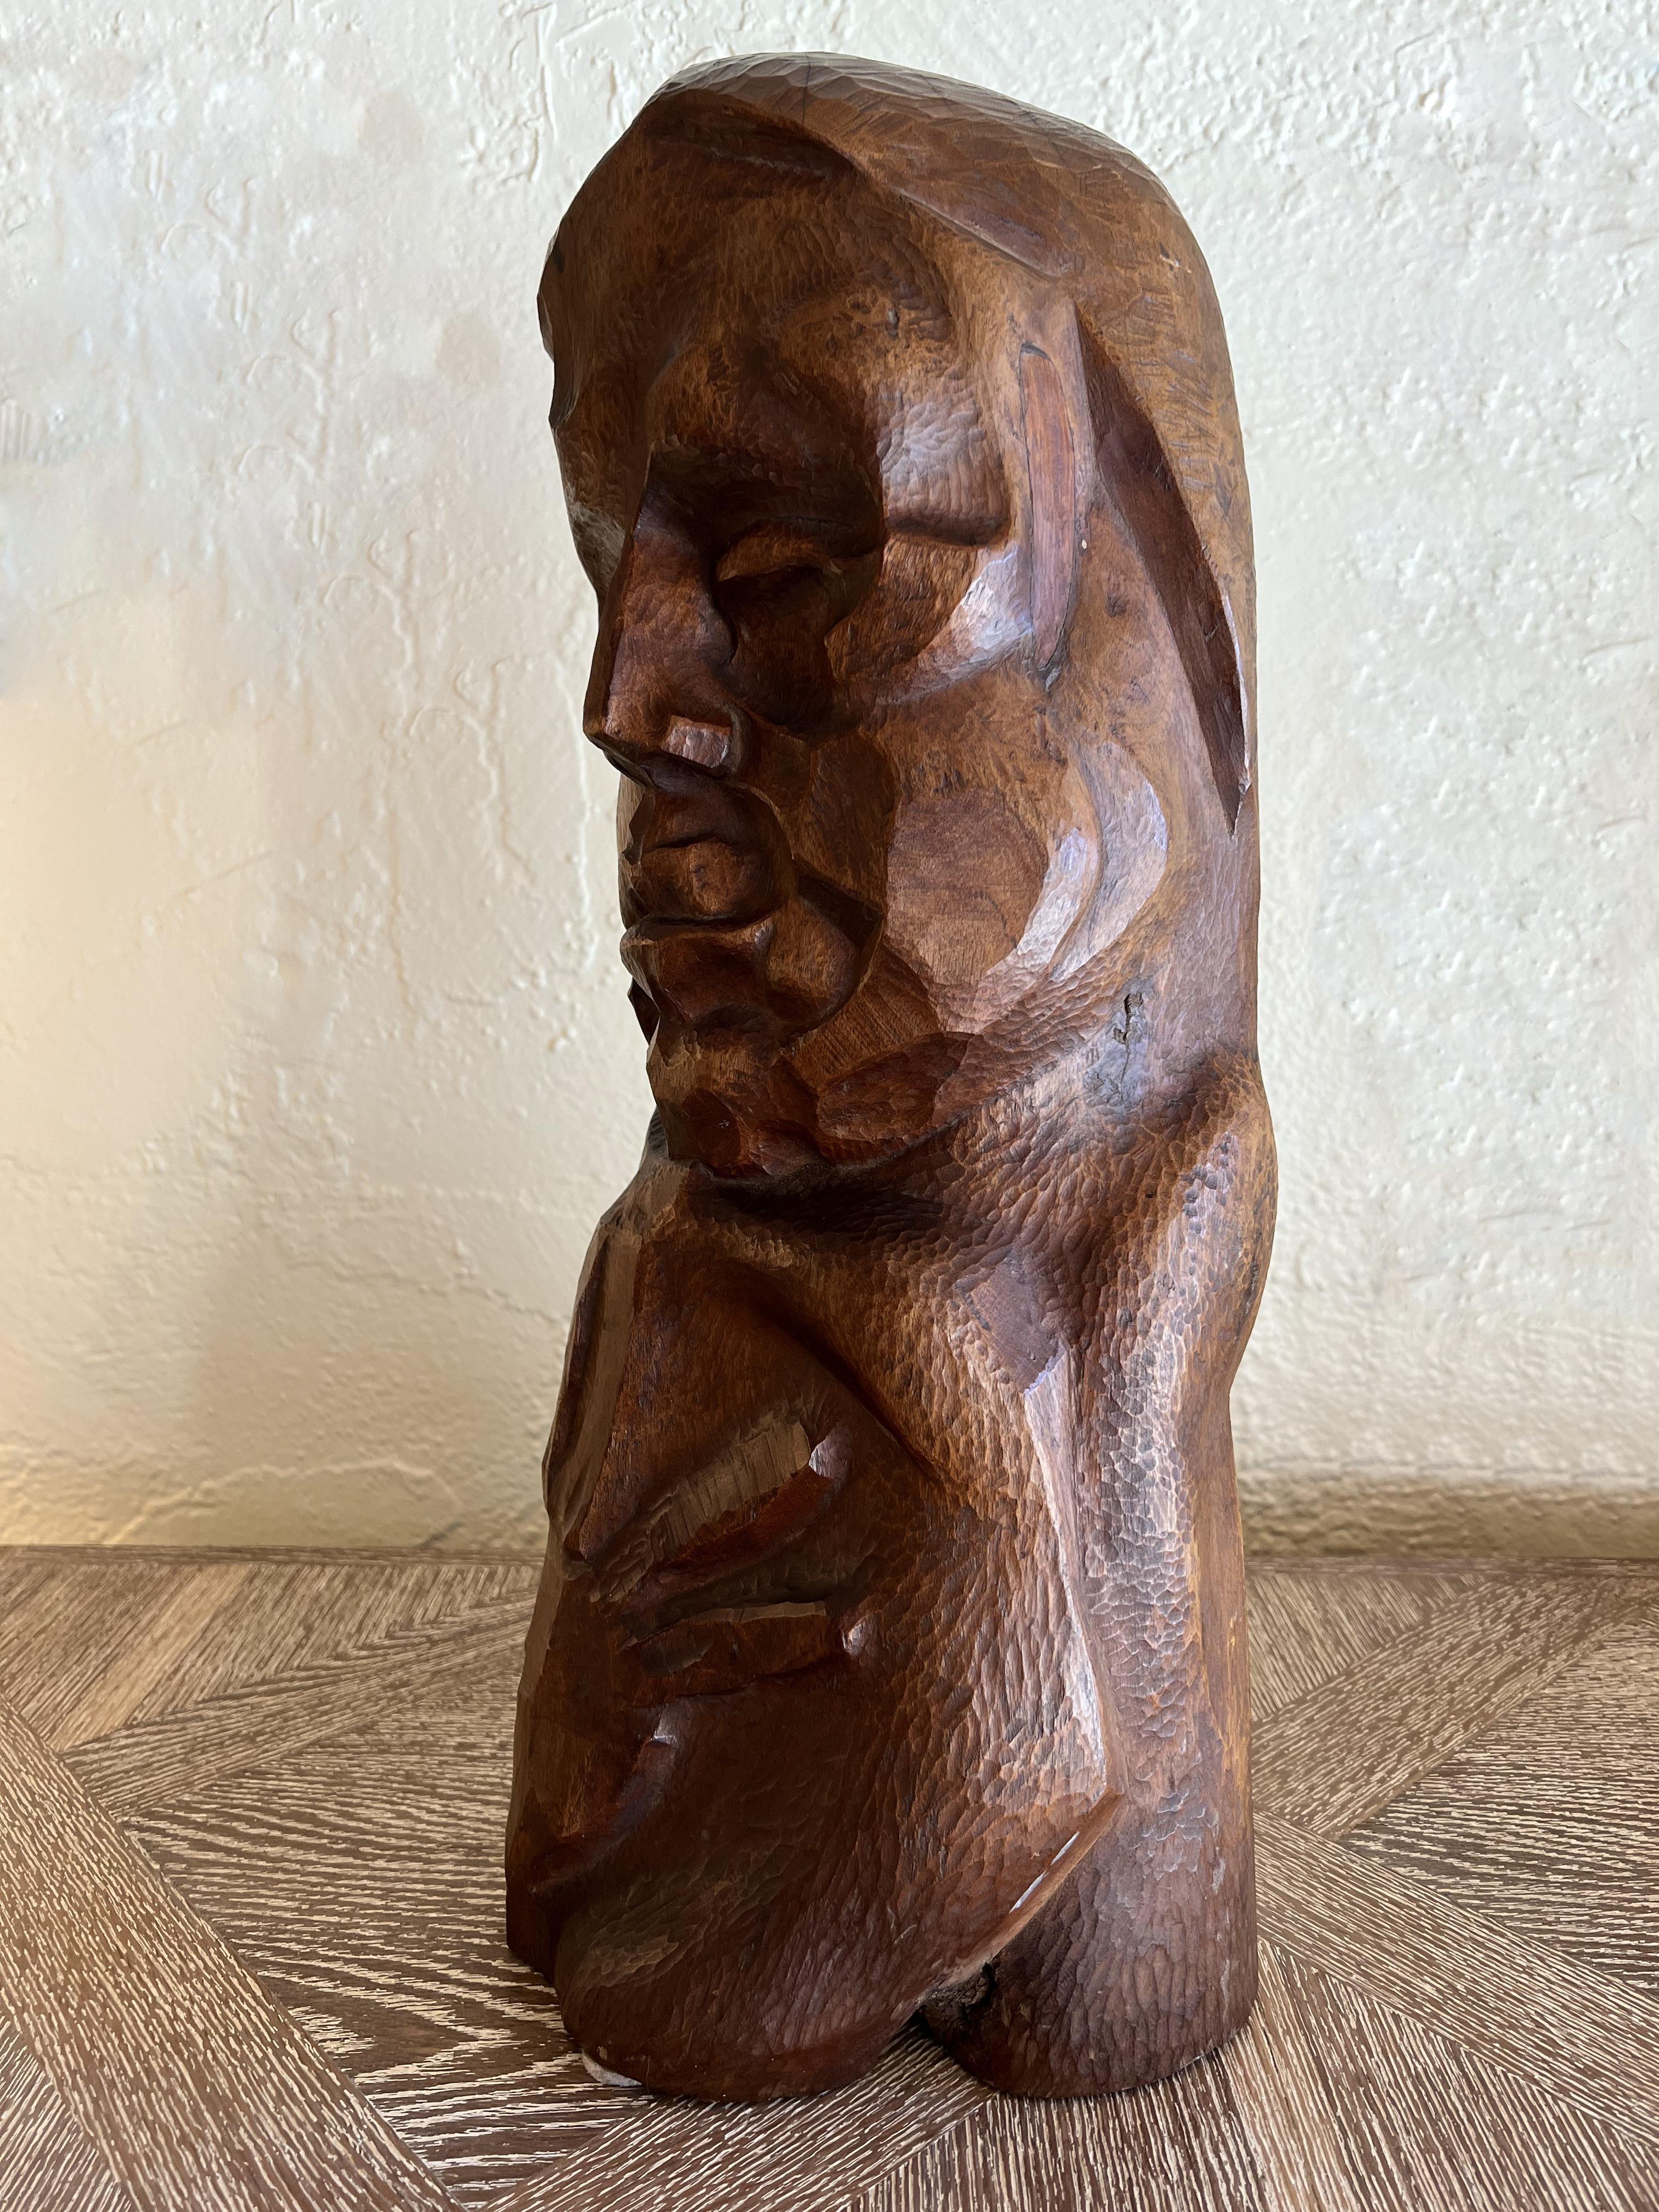 20th Century Man Bust Sculpture Signed Zolter, 1964 For Sale